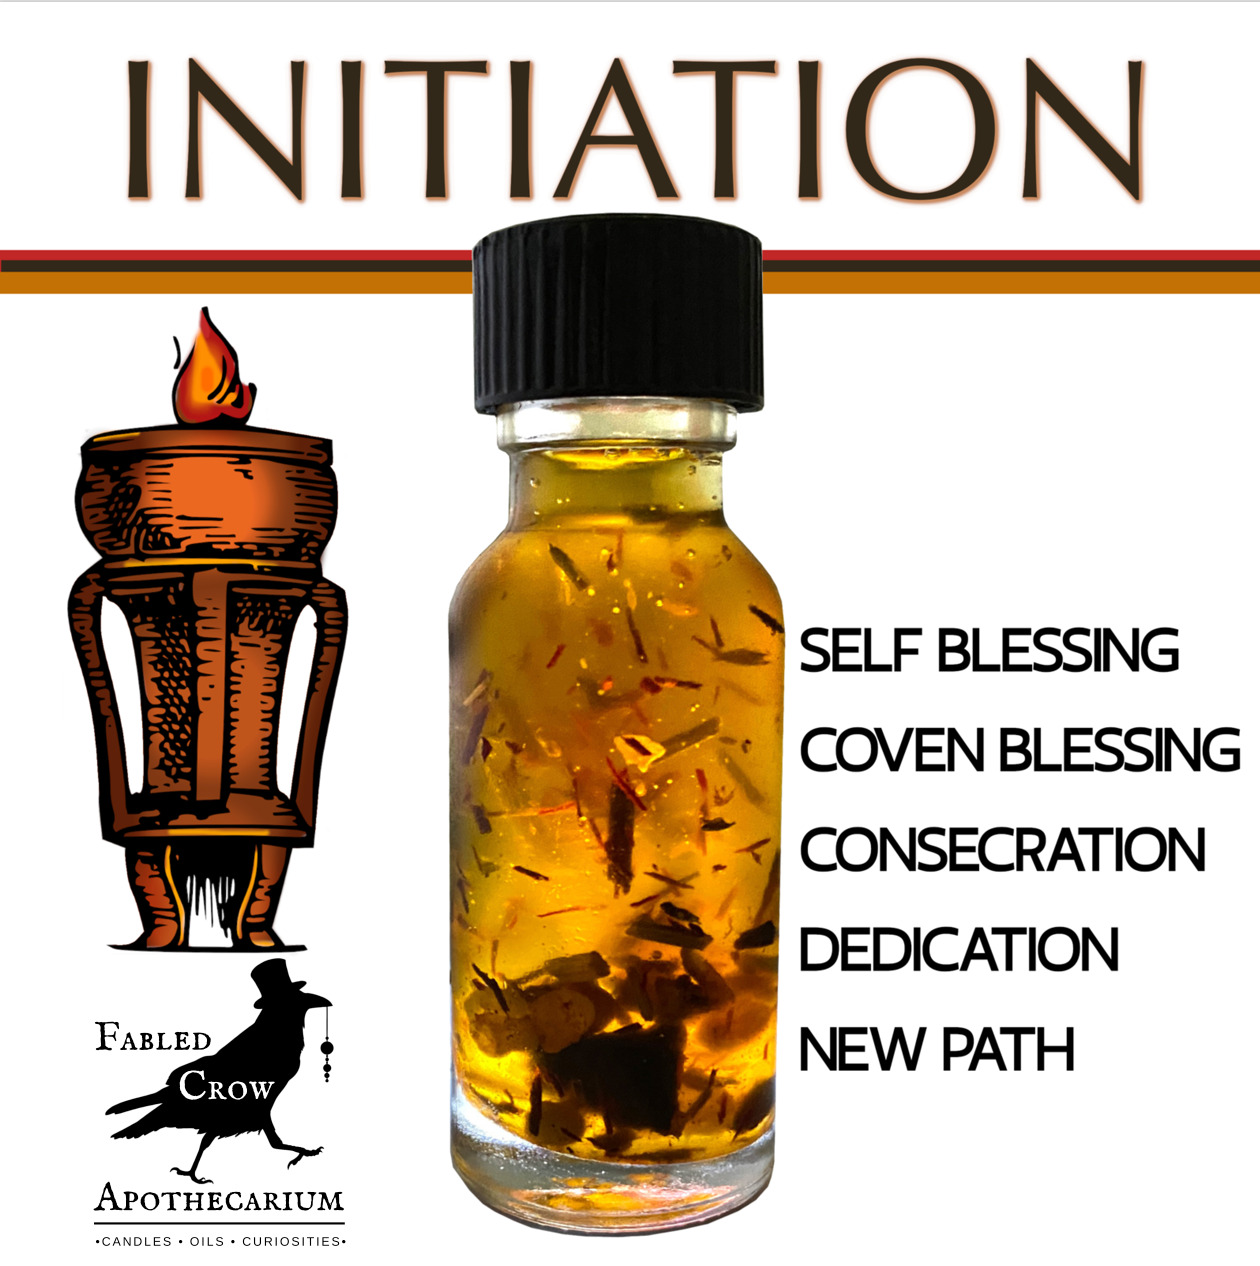 INITIATION Oil Self Blessing Dedication Consecration Witch Pagan FABLED CROW